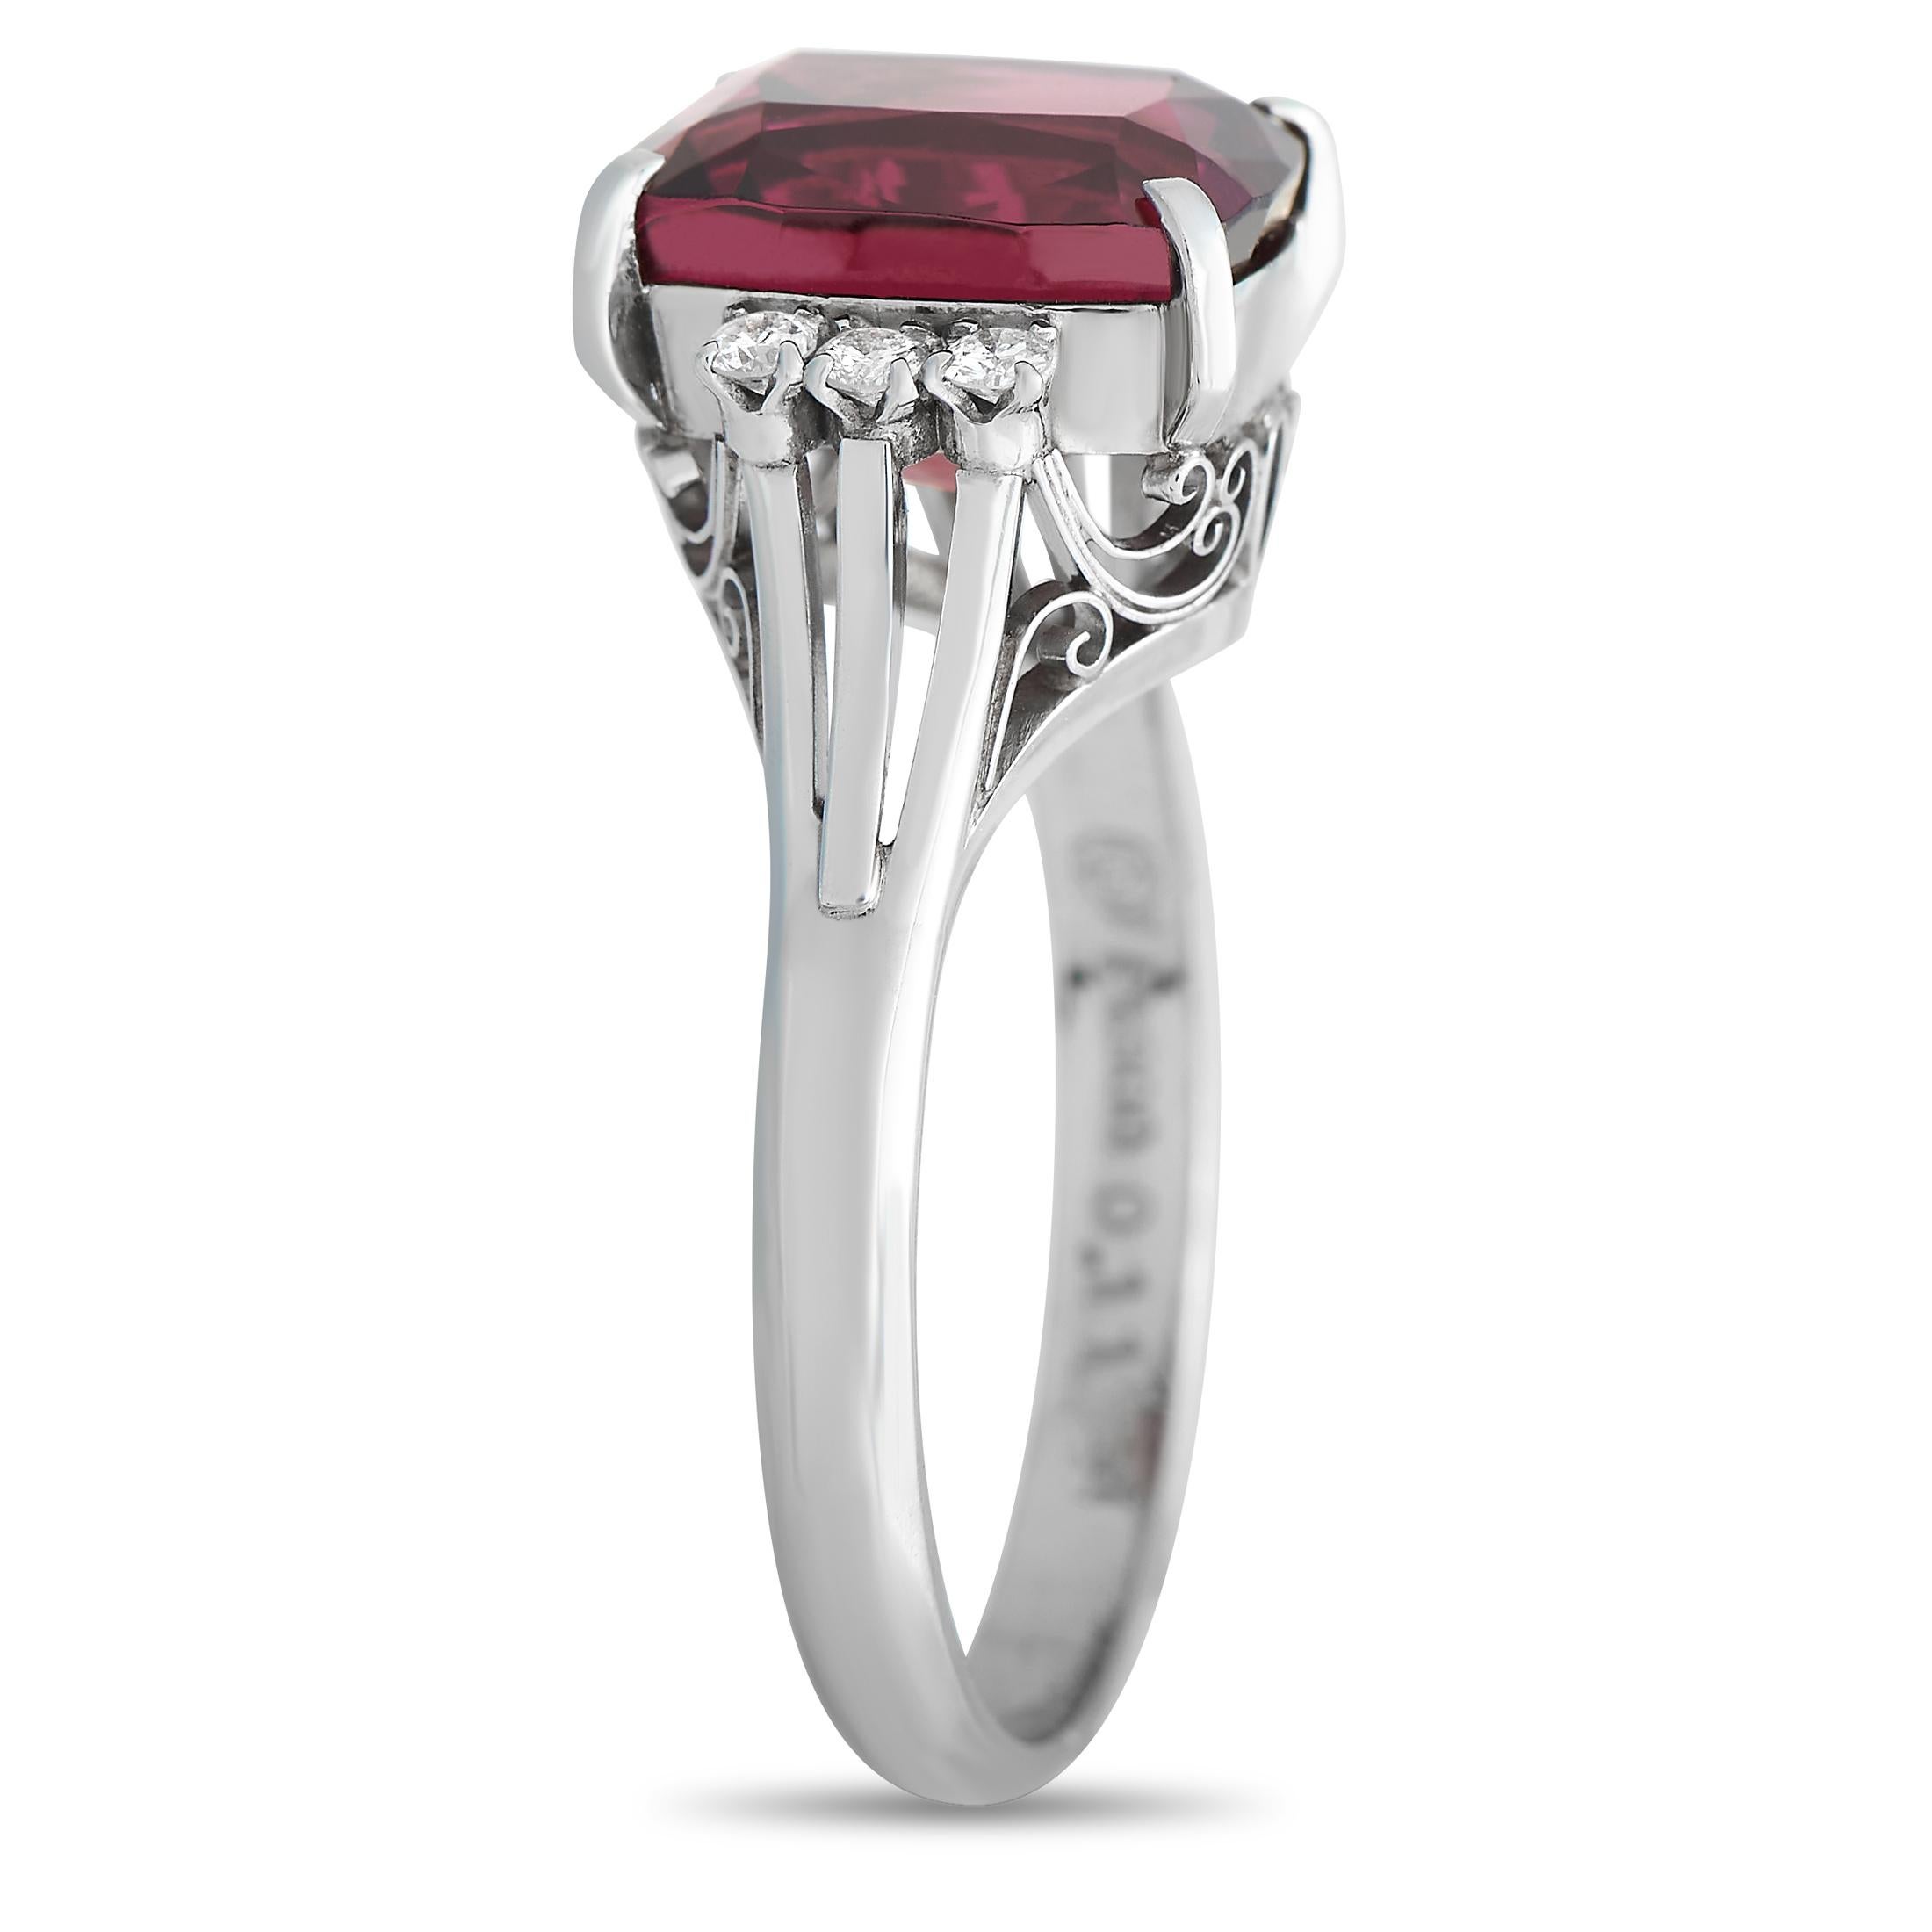 An intricate Platinum setting serves as a stunning foundation for this exquisite luxury ring. This ring’s bold 4.88 Garnet center stone adds a captivating pop of color to its classically elegant, design, while diamond accents totaling 0.11 carats